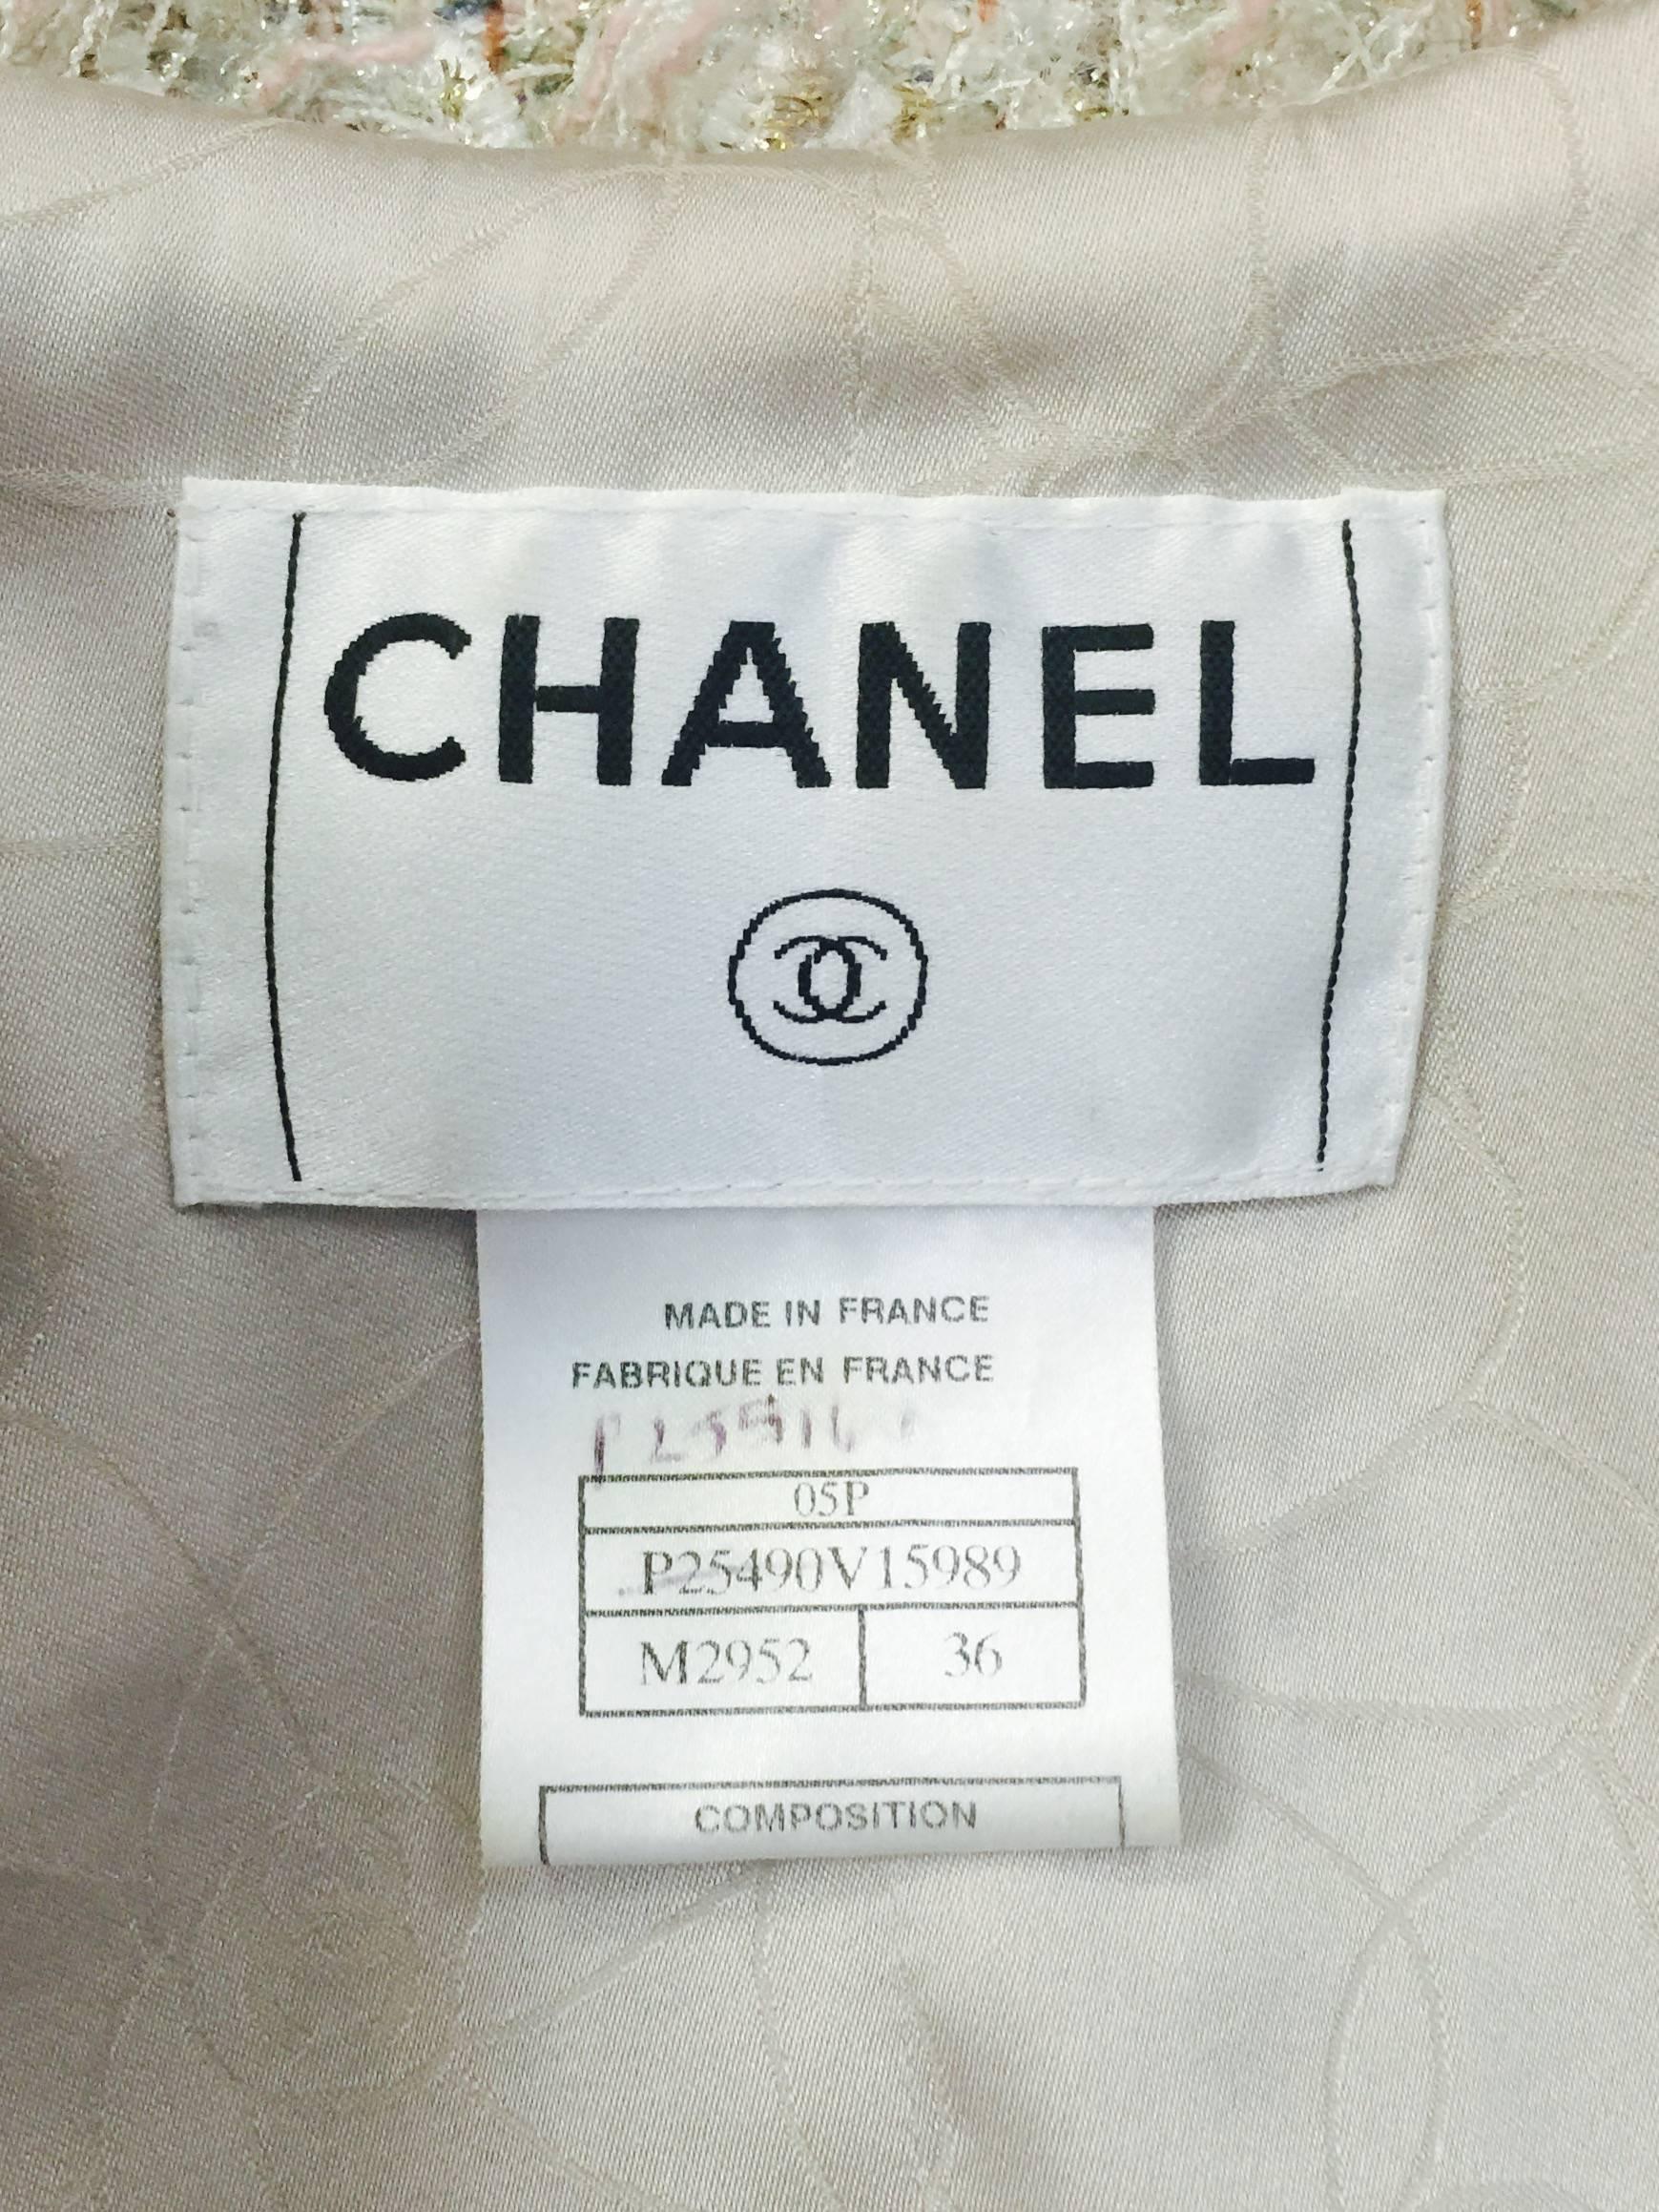 Chanel 2005 Spring Multi Color Tweed Jacket With Metallic Gold Embellishment 1